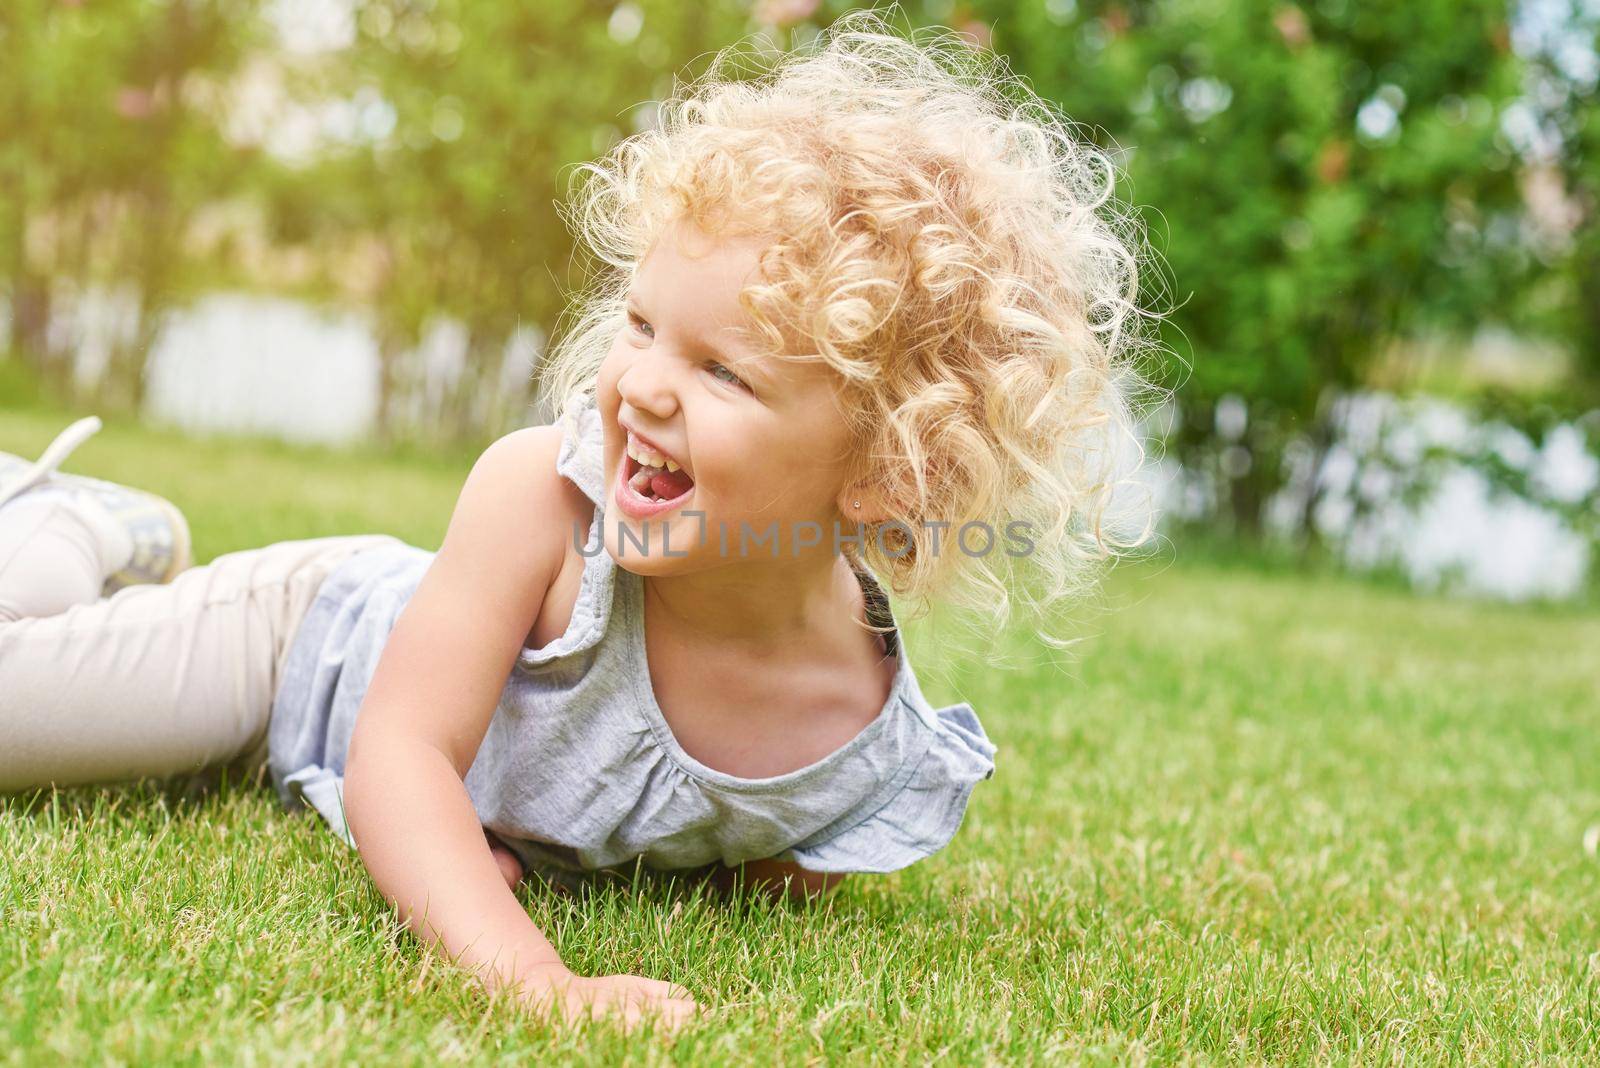 Shot of a cute little girl with blonde curly angelic hair lying on the grass laughing happily looking away copyspace nature enjoyment emotions kids children family recreation summer concept.